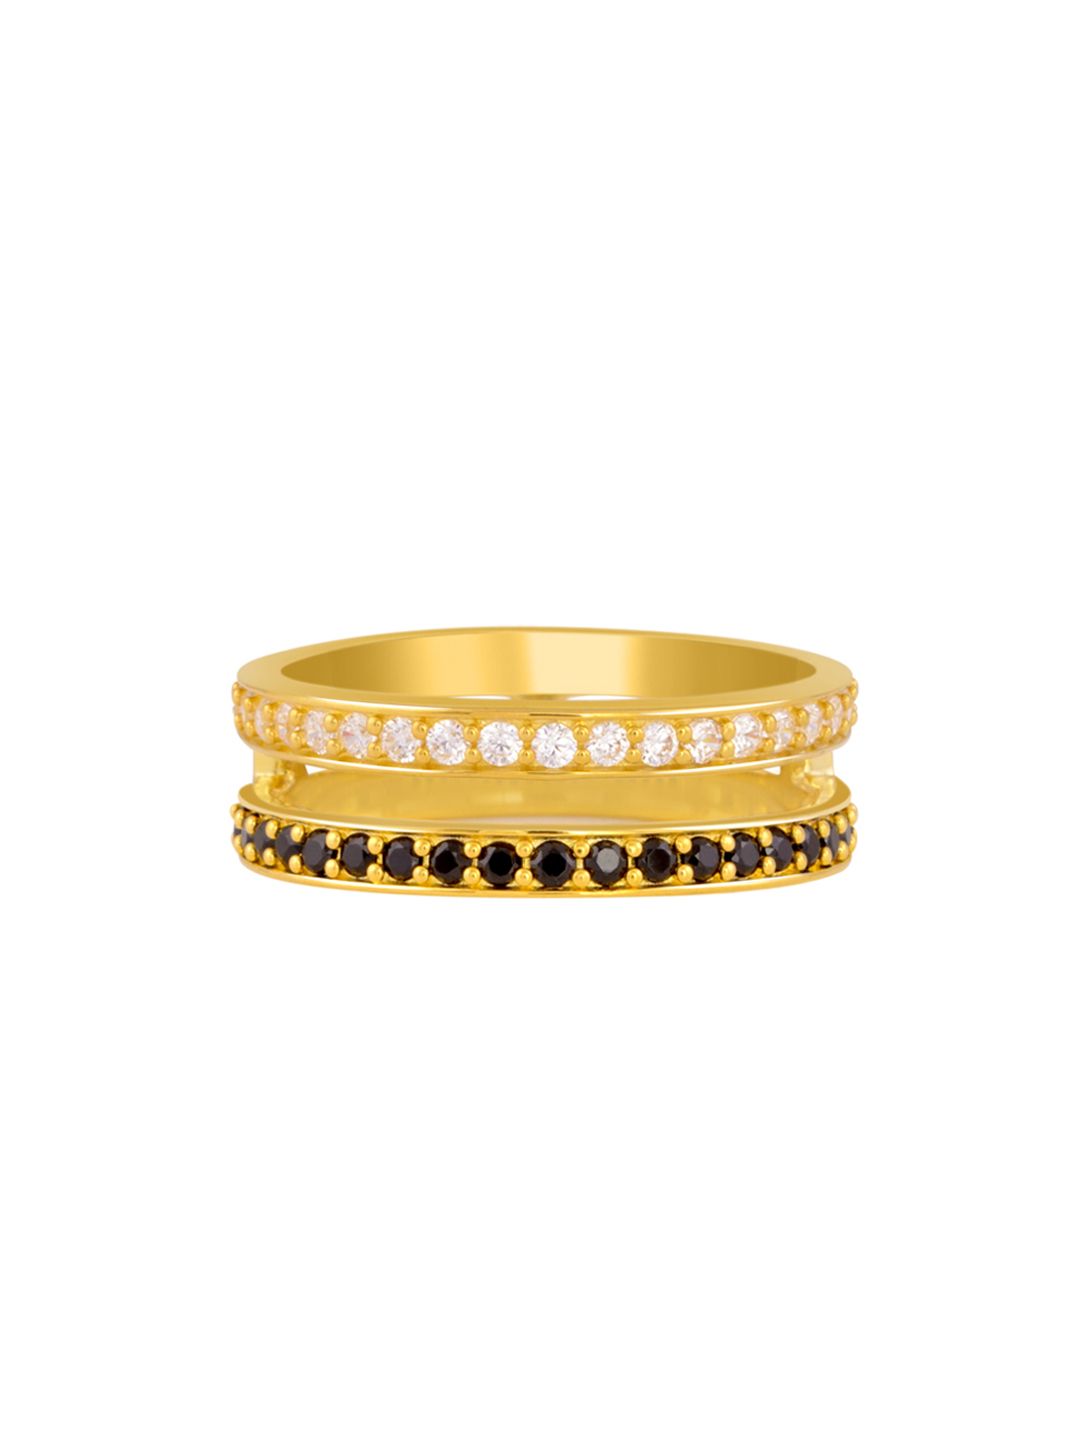 TALISMAN Women Handcrafted Gold-Plated Cubic Zirconia-Studded Ring Price in India